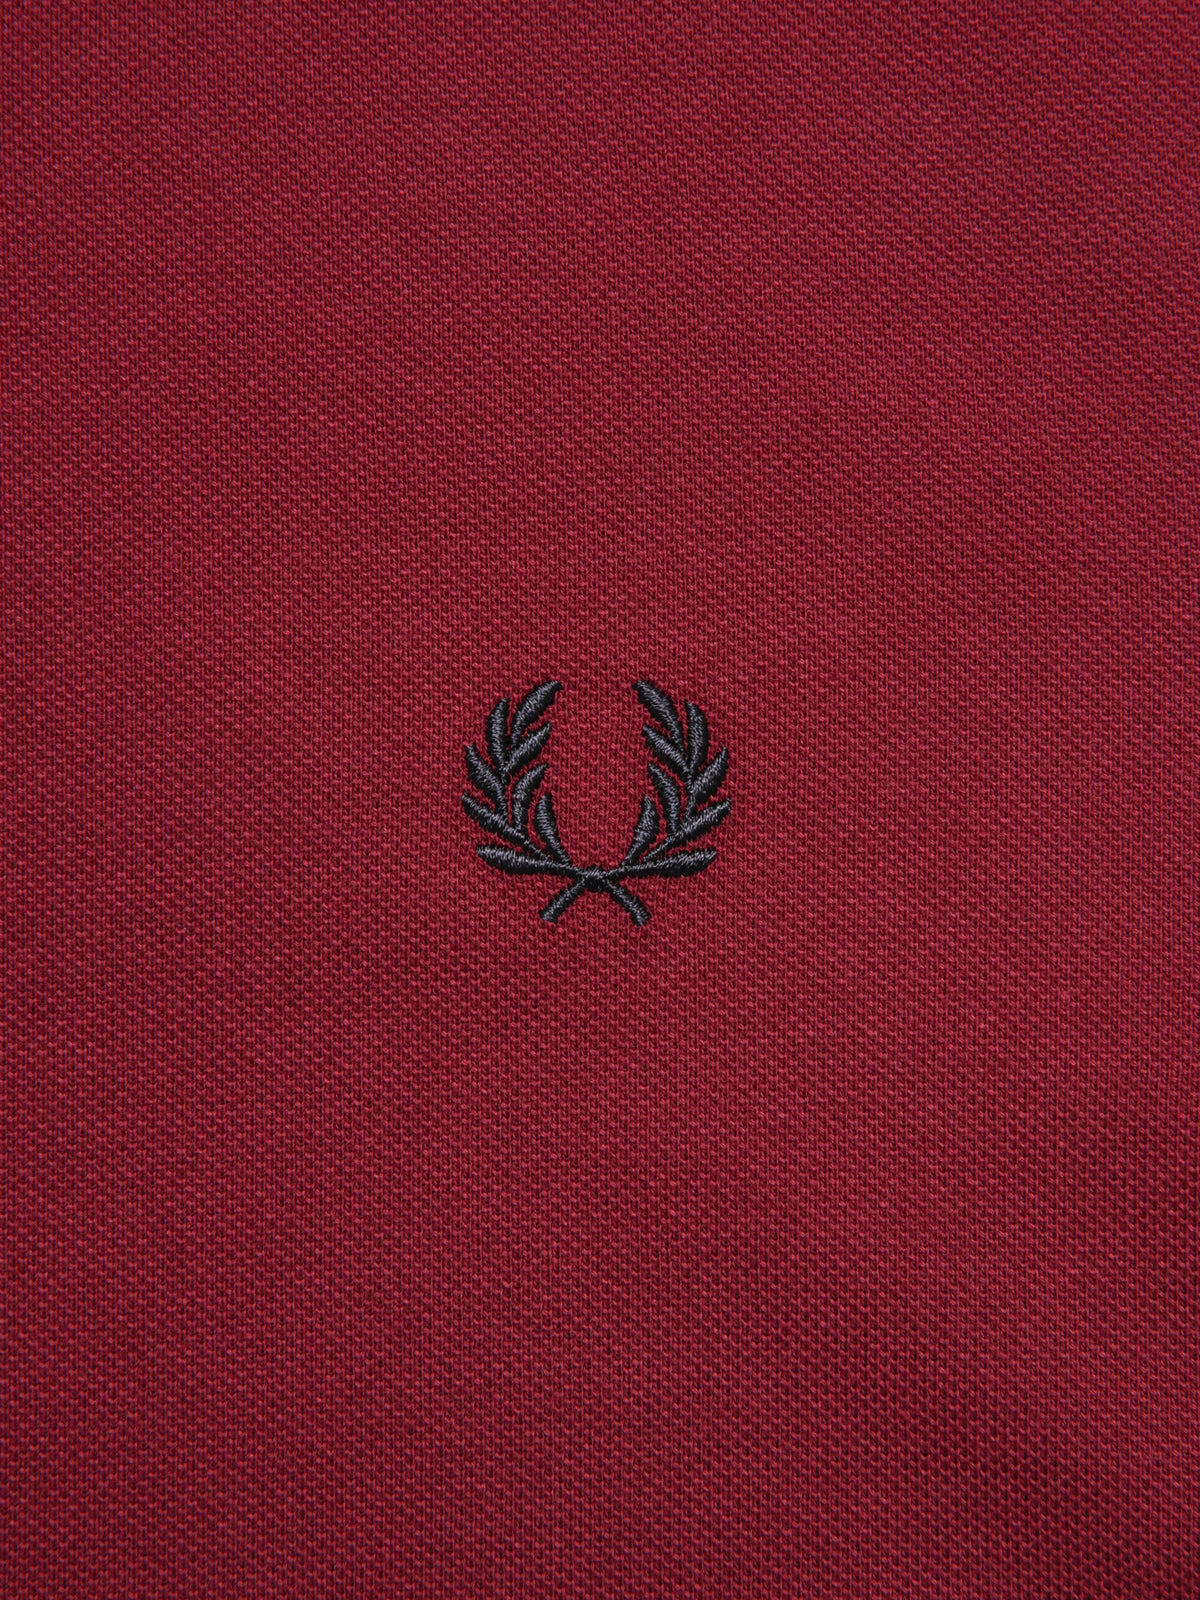 Twin Tripped Fred Perry Shirt in Burgundy